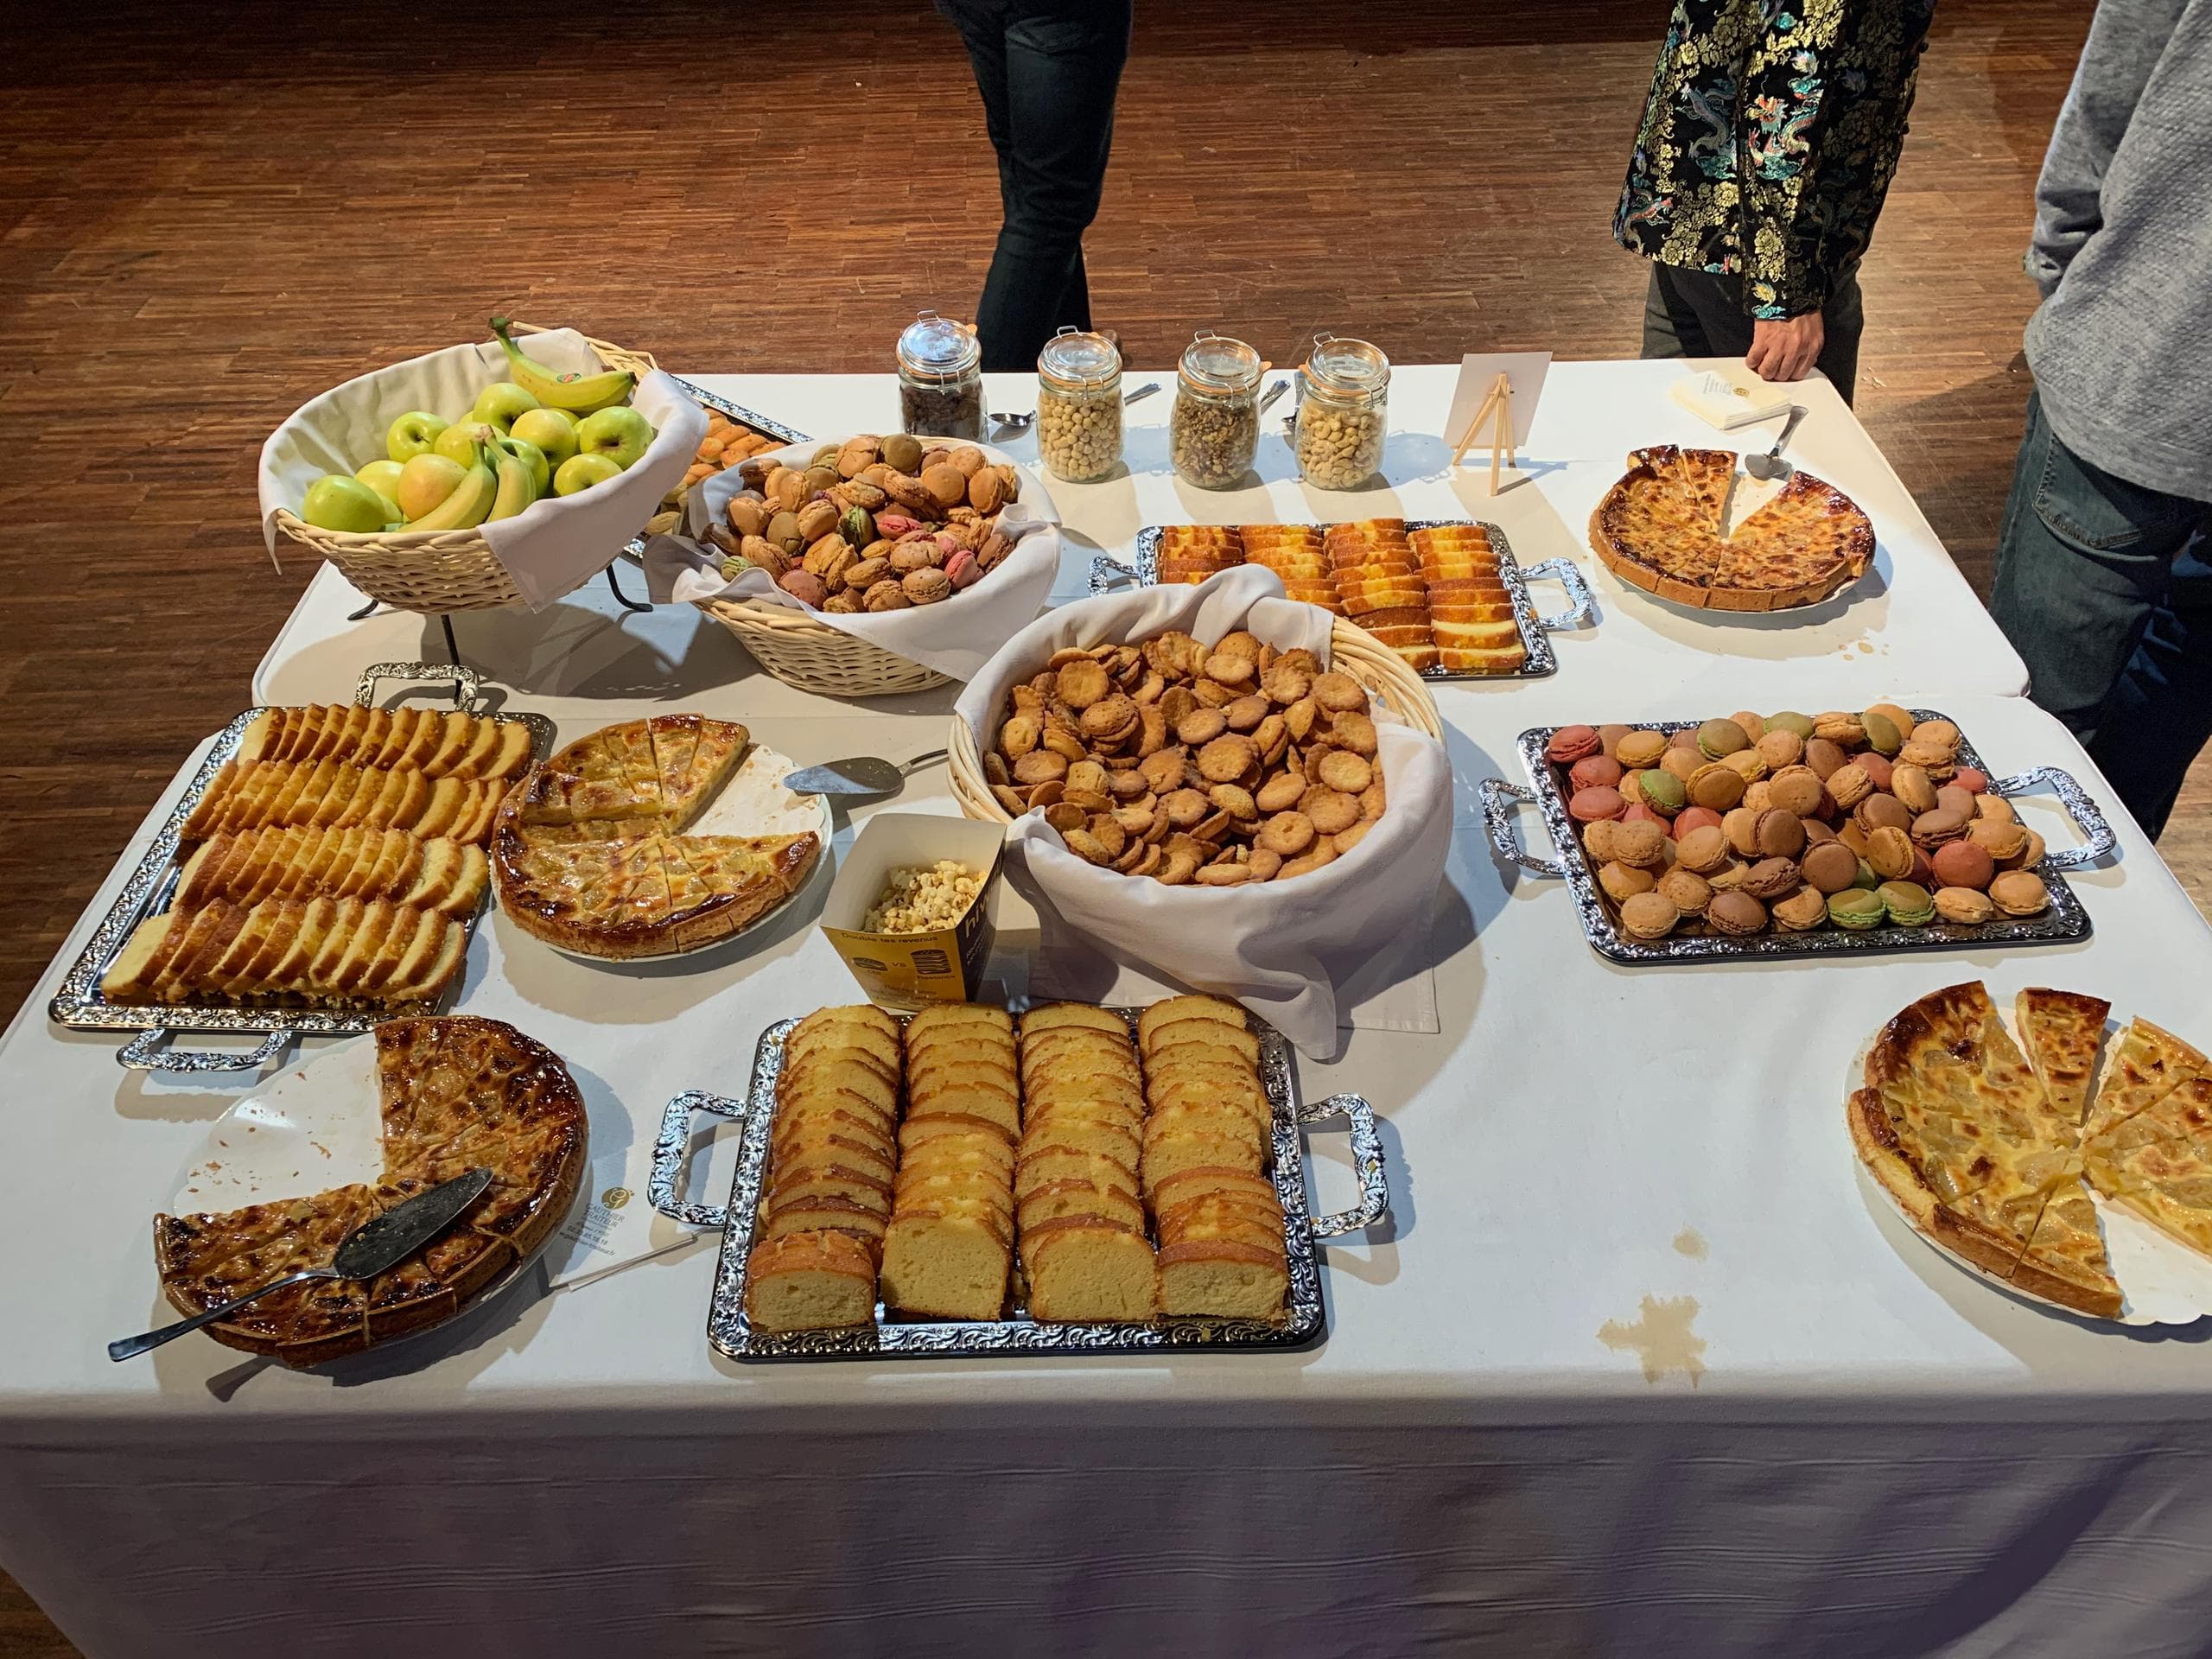 Photograph of a table with lots of cakes on it